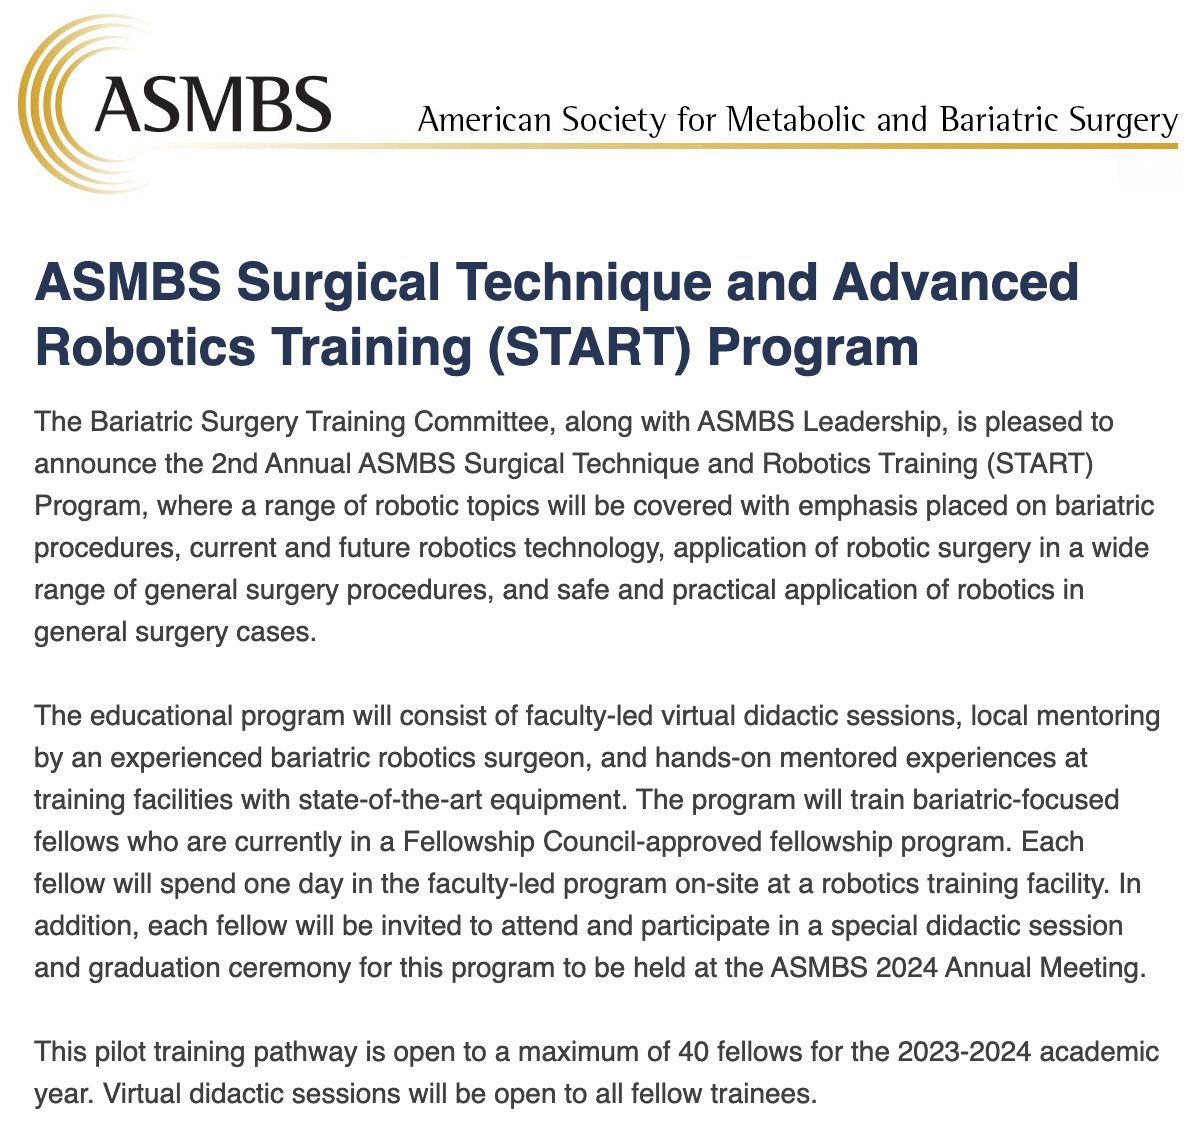 Calling all MIS/Bariatric fellows - applications for the 2023-2024 ASMBS START program for advanced robotic techniques in bariatric surgery are now open! @ASMBS @SOARD_JOURNAL @me4_so Apply here: asmbs.org/professional-e…